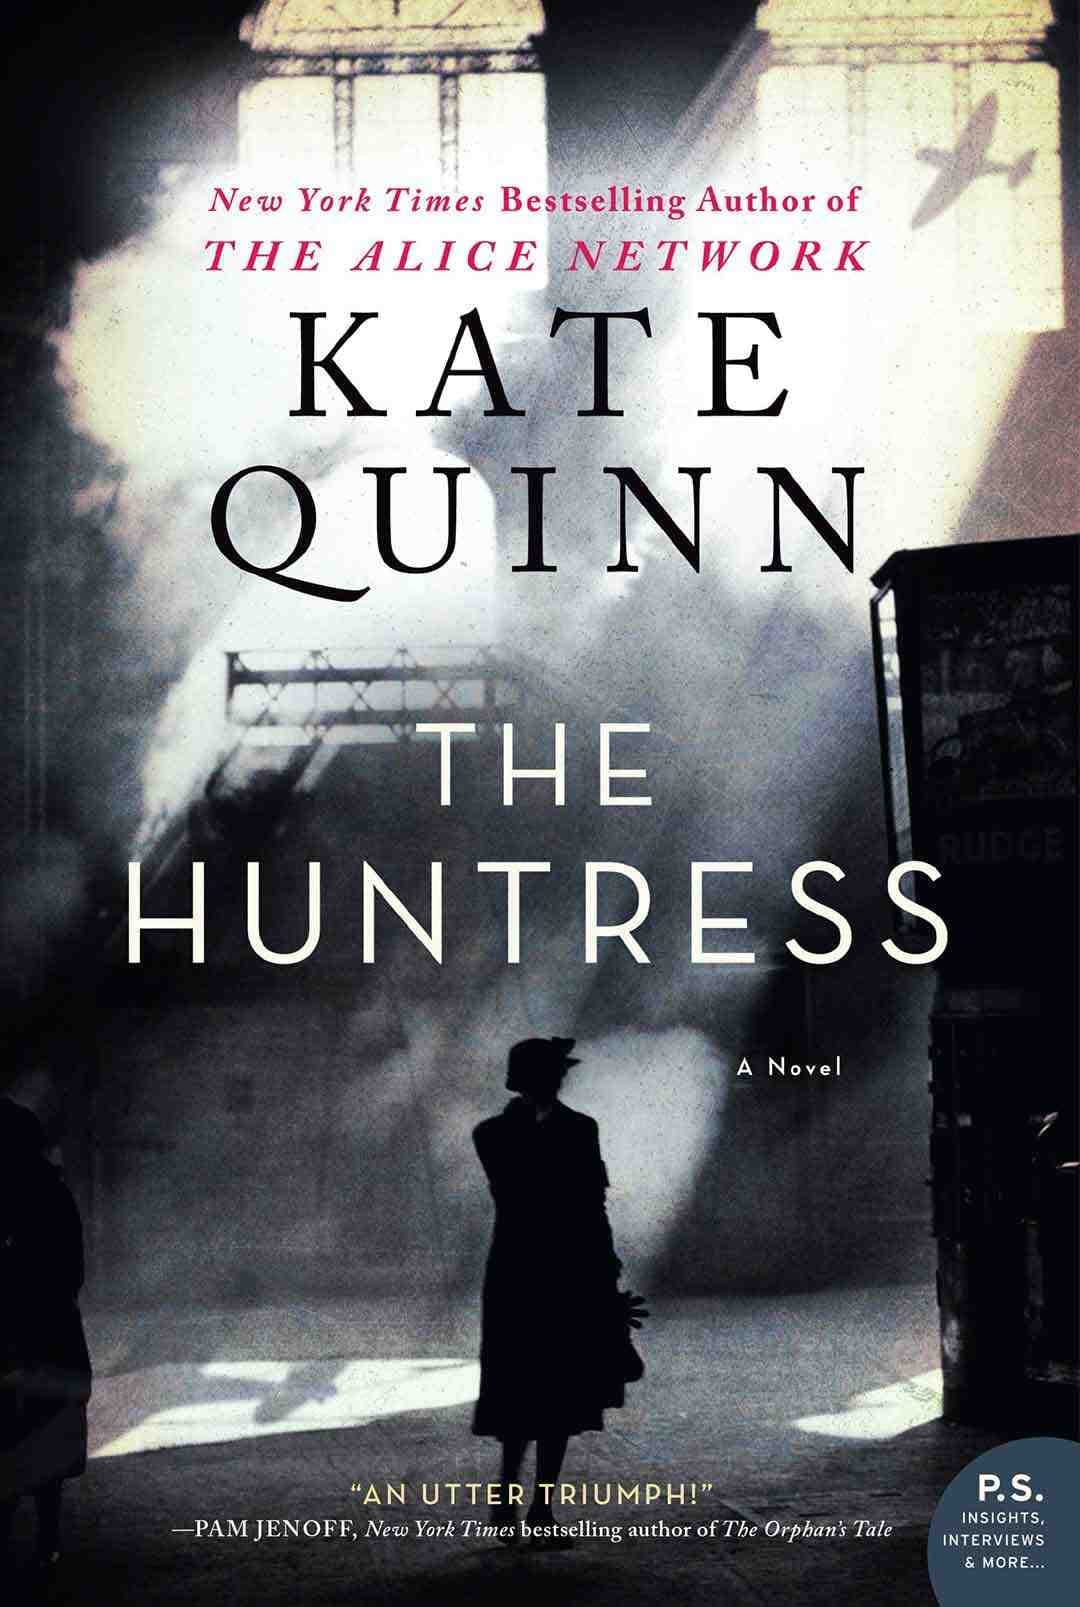 “The Huntress” by Kate Quinn book cover